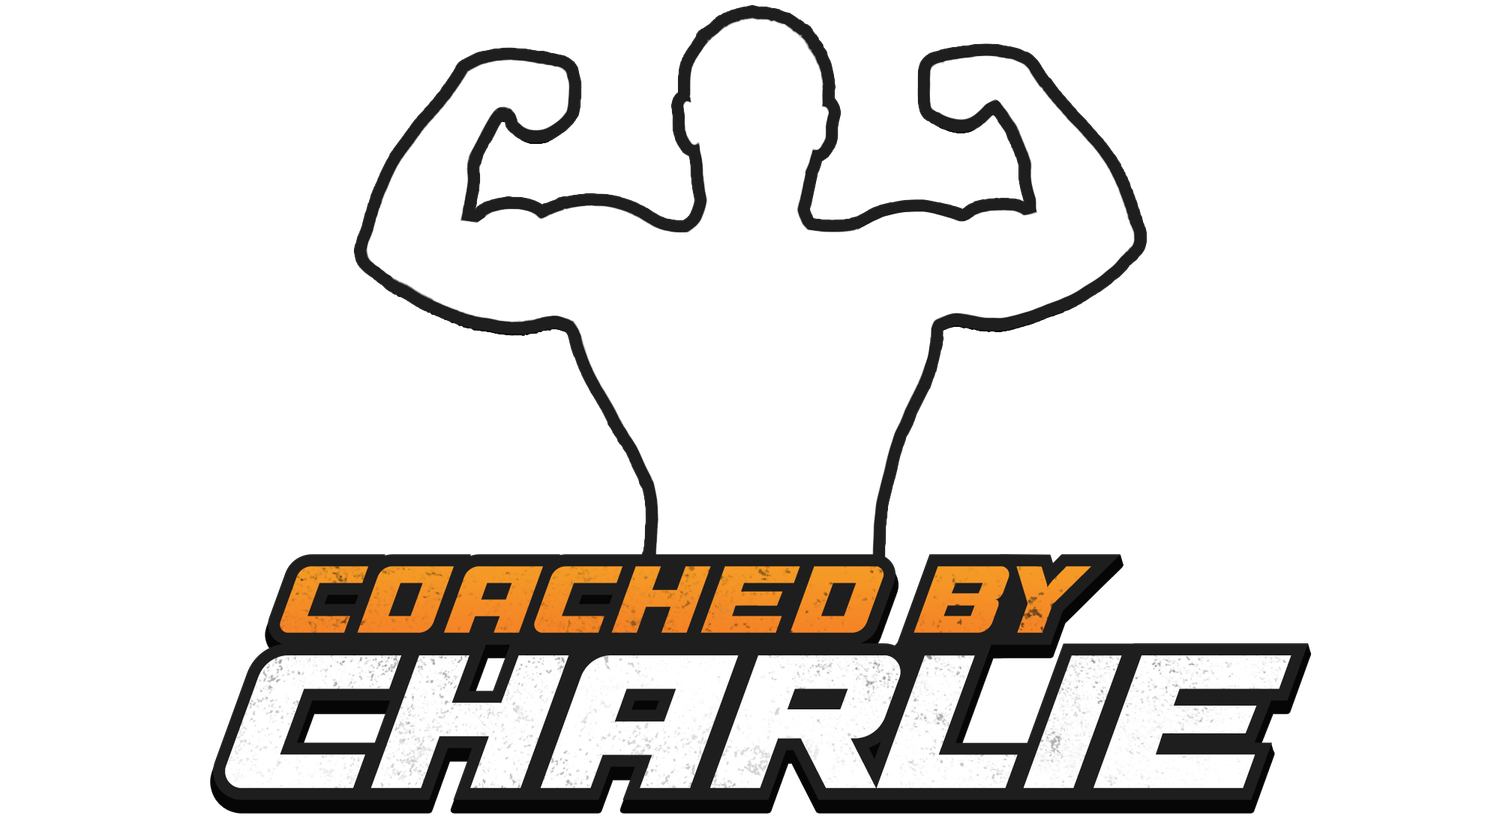 Coached By Charlie